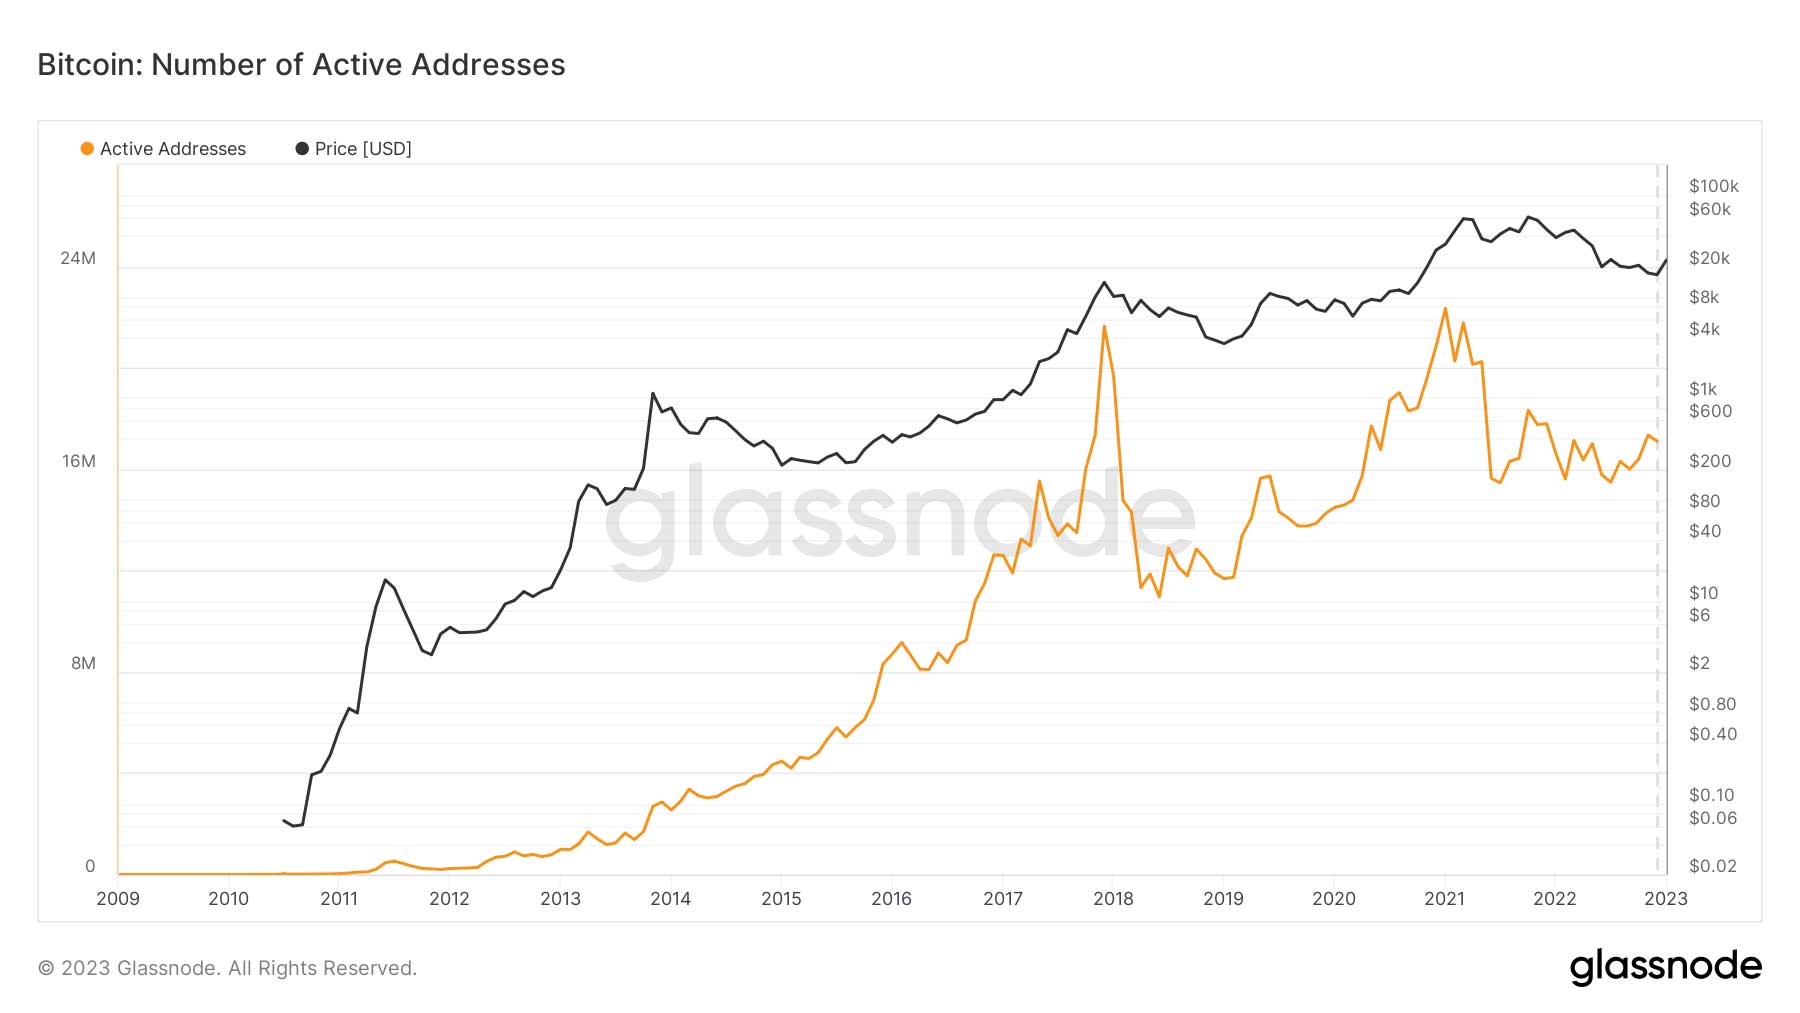 A line graph and crypto fundamental analysis of the number of Bitcoin active addresses